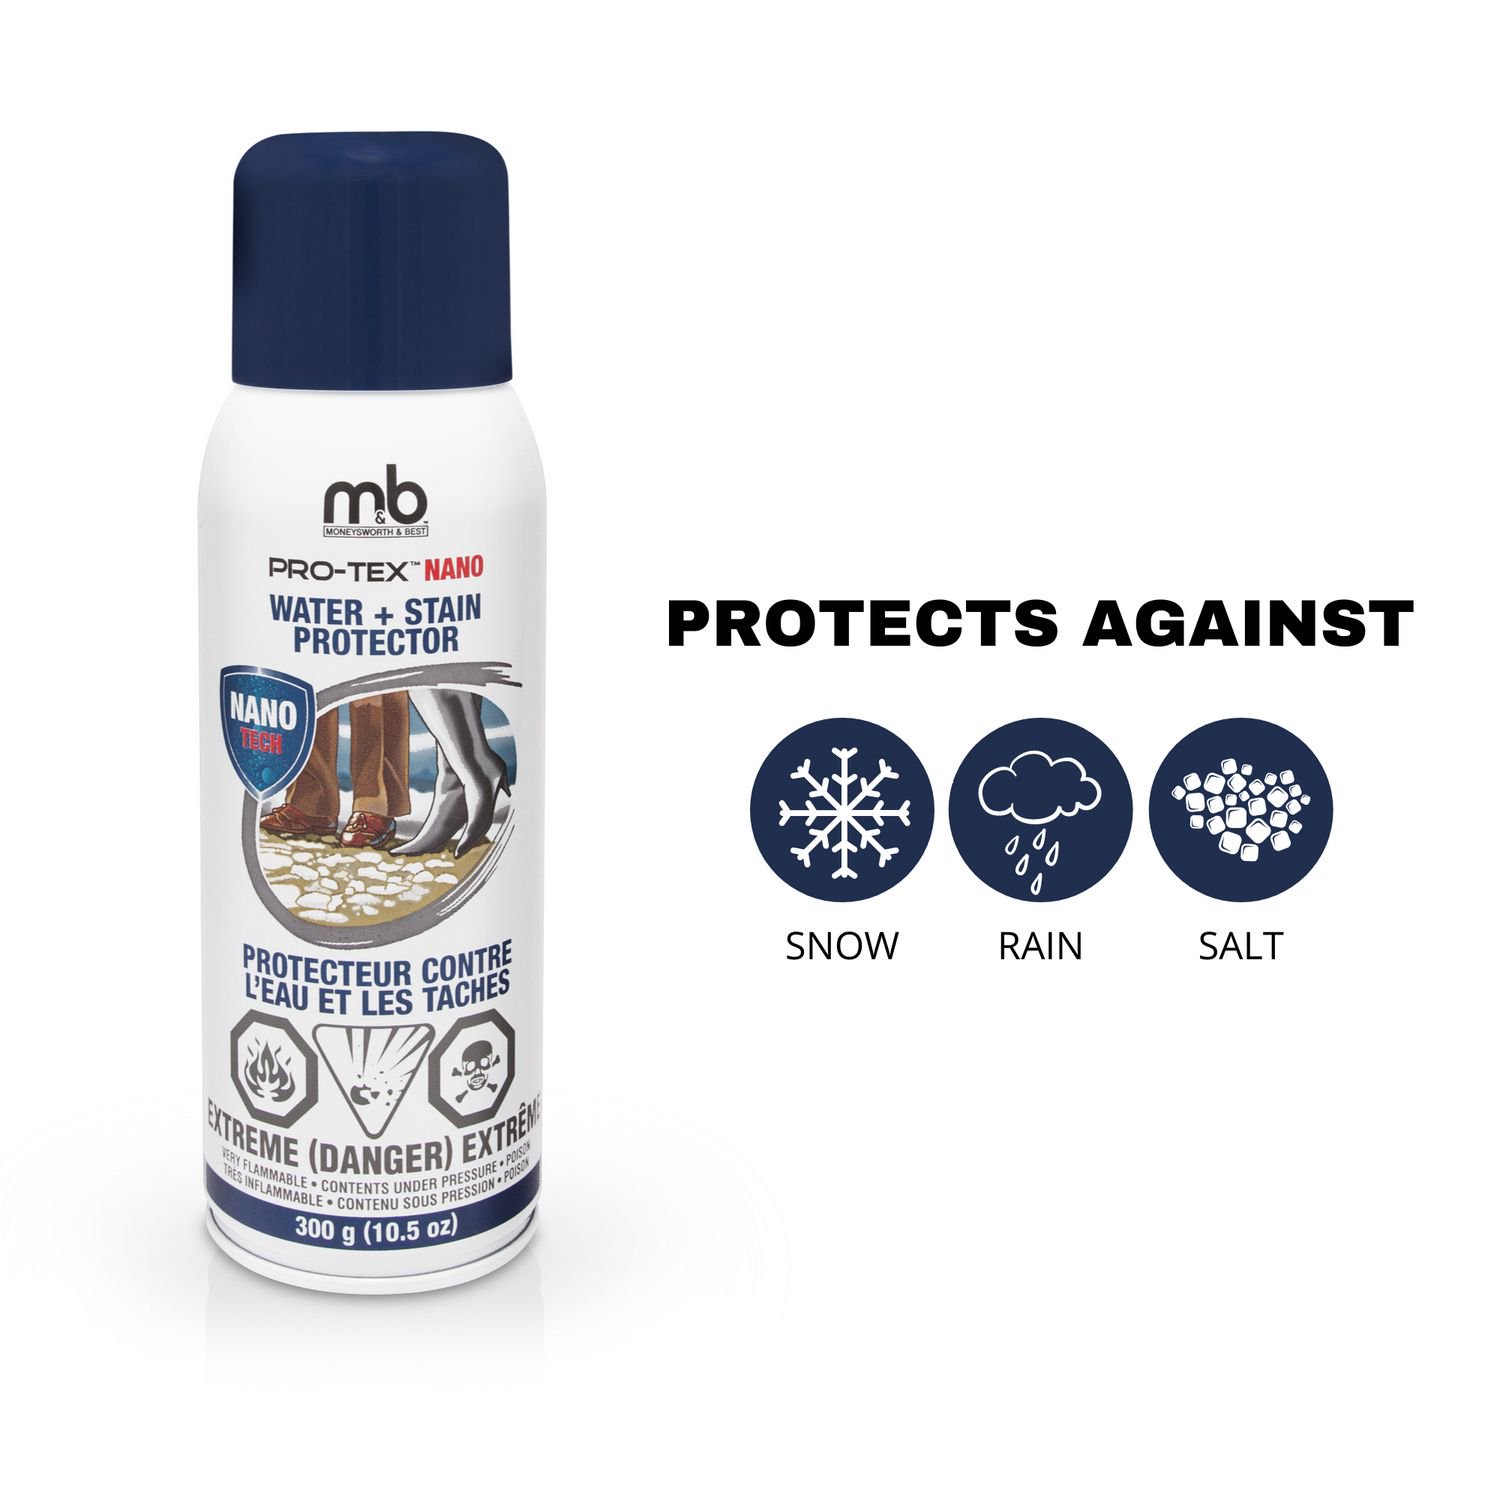 Moneysworth & Best Pro-Tex Water & Stain Protector, 300-g